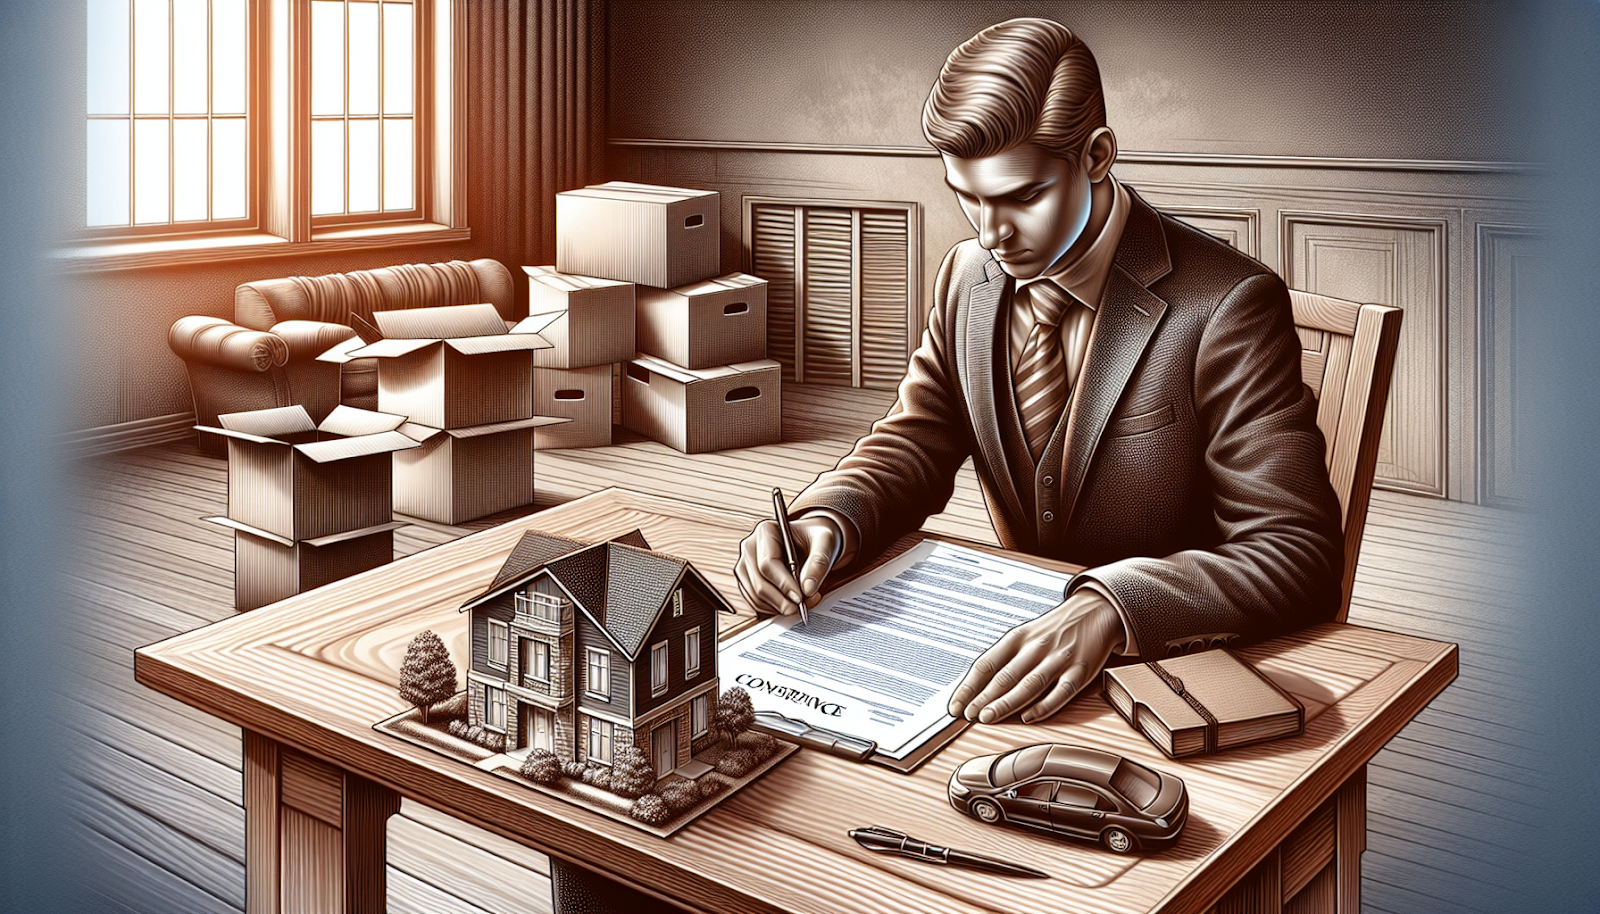 Illustration of a homeowner reviewing insurance policy documents